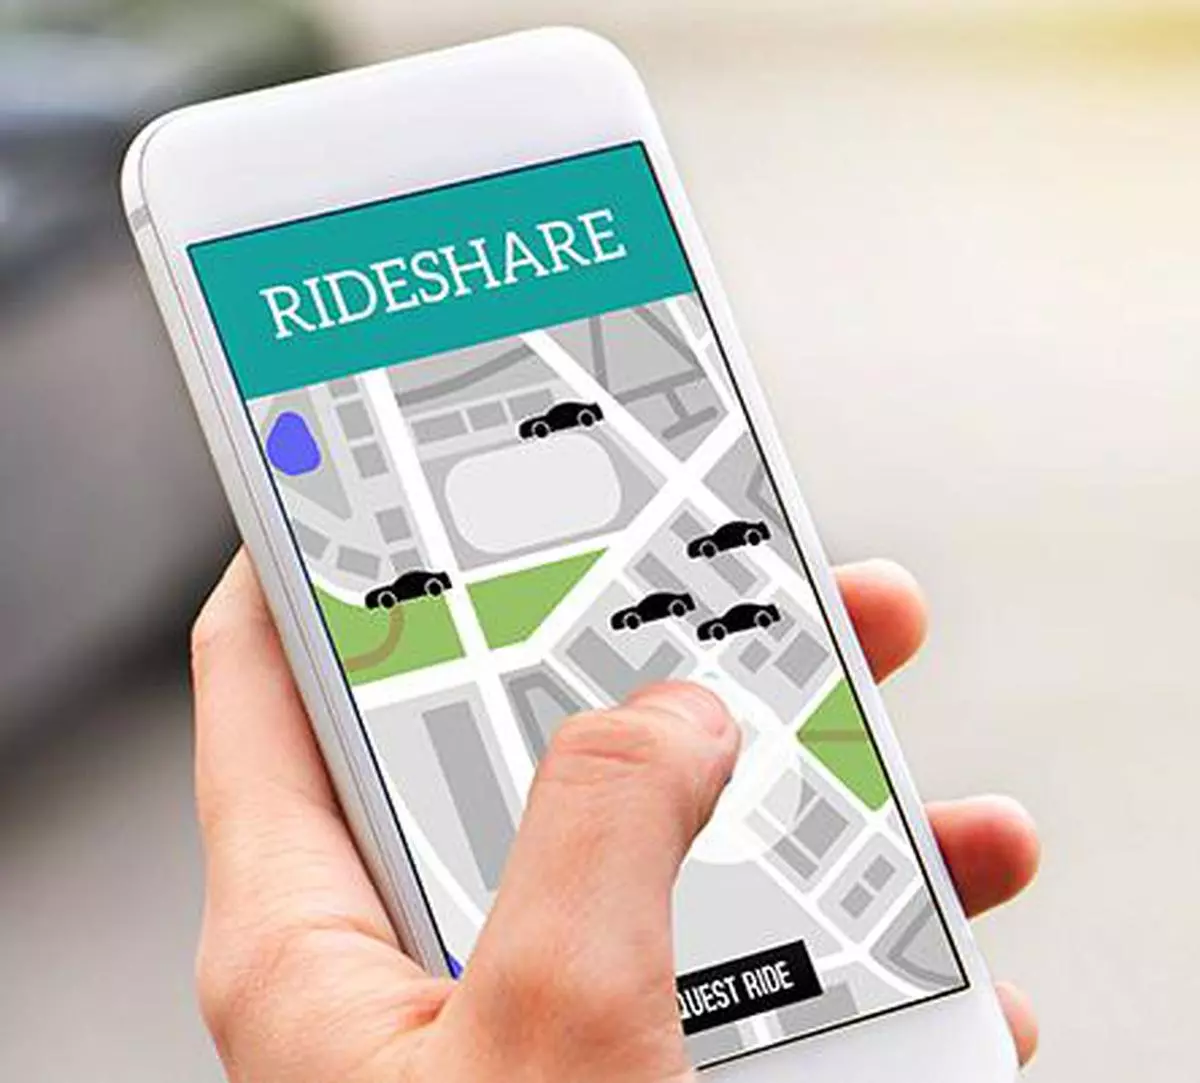 Ride share taxi service on smartphone screen. Online rideshare app and carpool mobile application. Woman holding phone with a car in the background. Person ordering ride with cellphone.